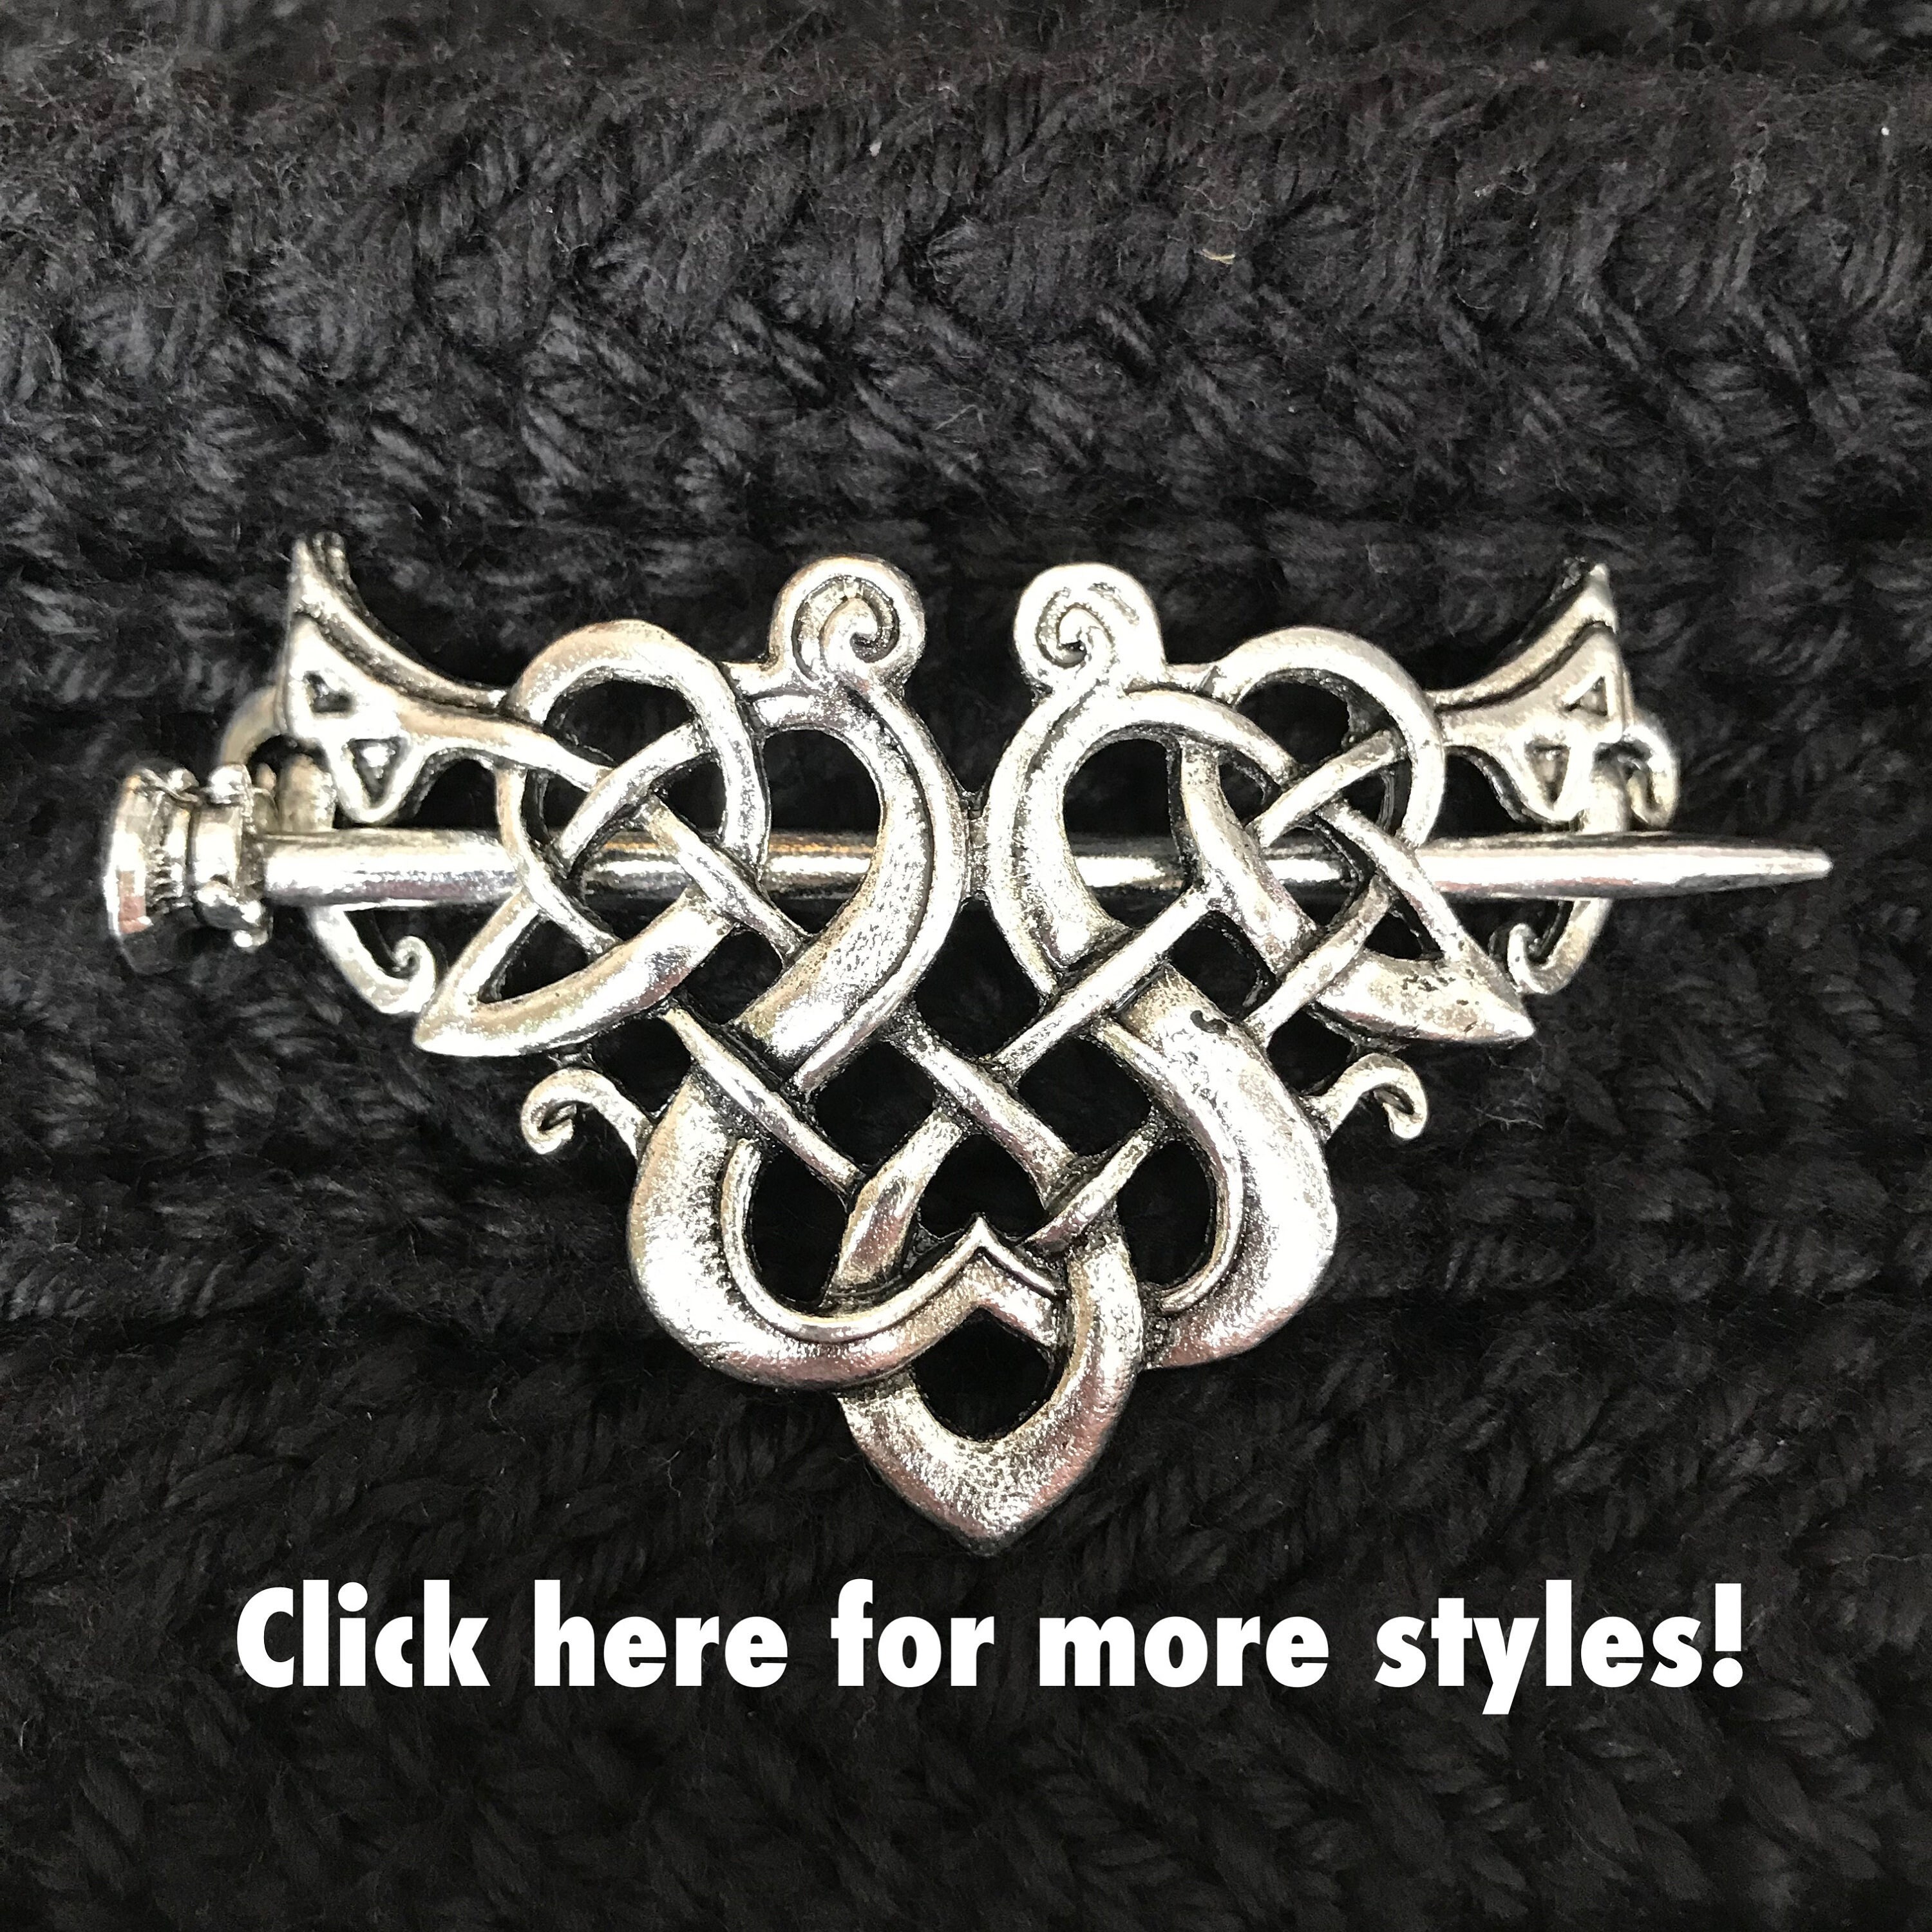  Kkjoy Hair Barrettes Large Hand Crafted Hair Clips Retro  Vintage Metal French Hairpins Viking Celtic Knot Hair Accessory Hair  Barrettes for Women Girls Jewelry Accessory : Beauty & Personal Care